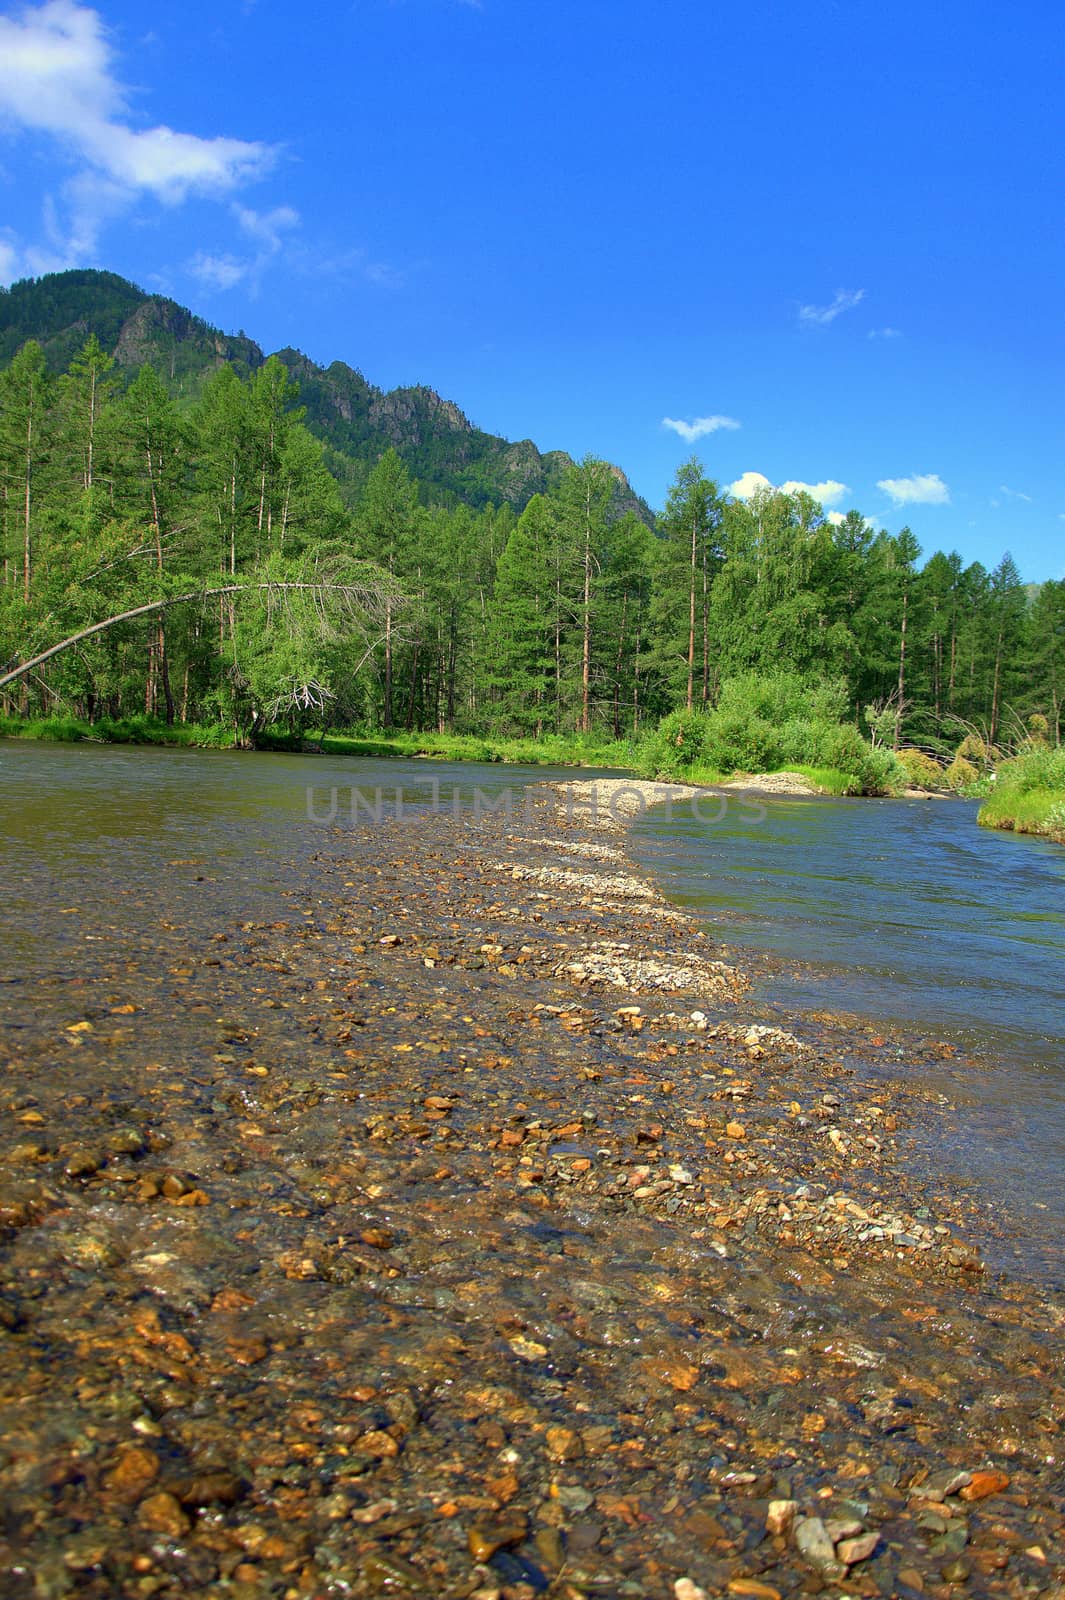 The rocky bottom of the shallow Ursul River flowing in is surrounded by forests and mountains. Altai, Siberia, Russia.